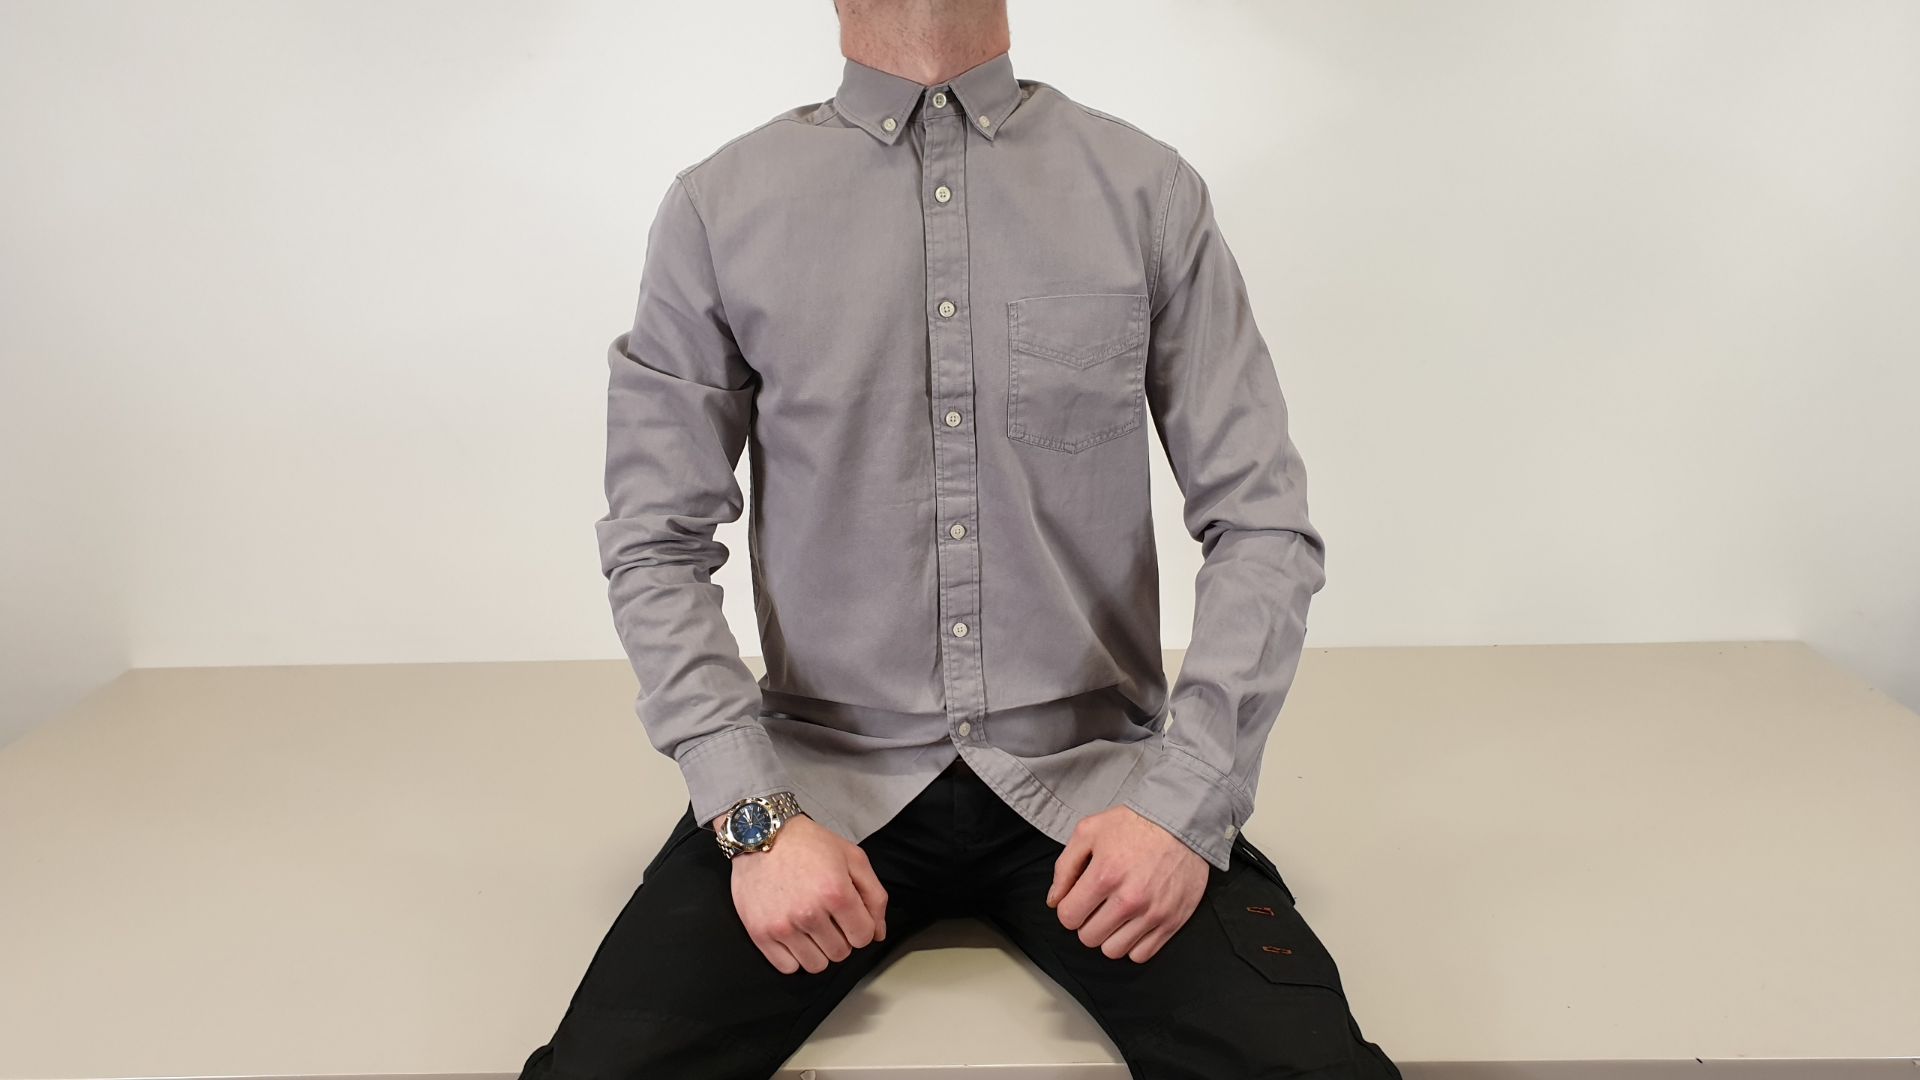 12 X BRAND NEW TOPMAN GREY BUTTONED SHIRT SIZE M RRP. £30.00 PP